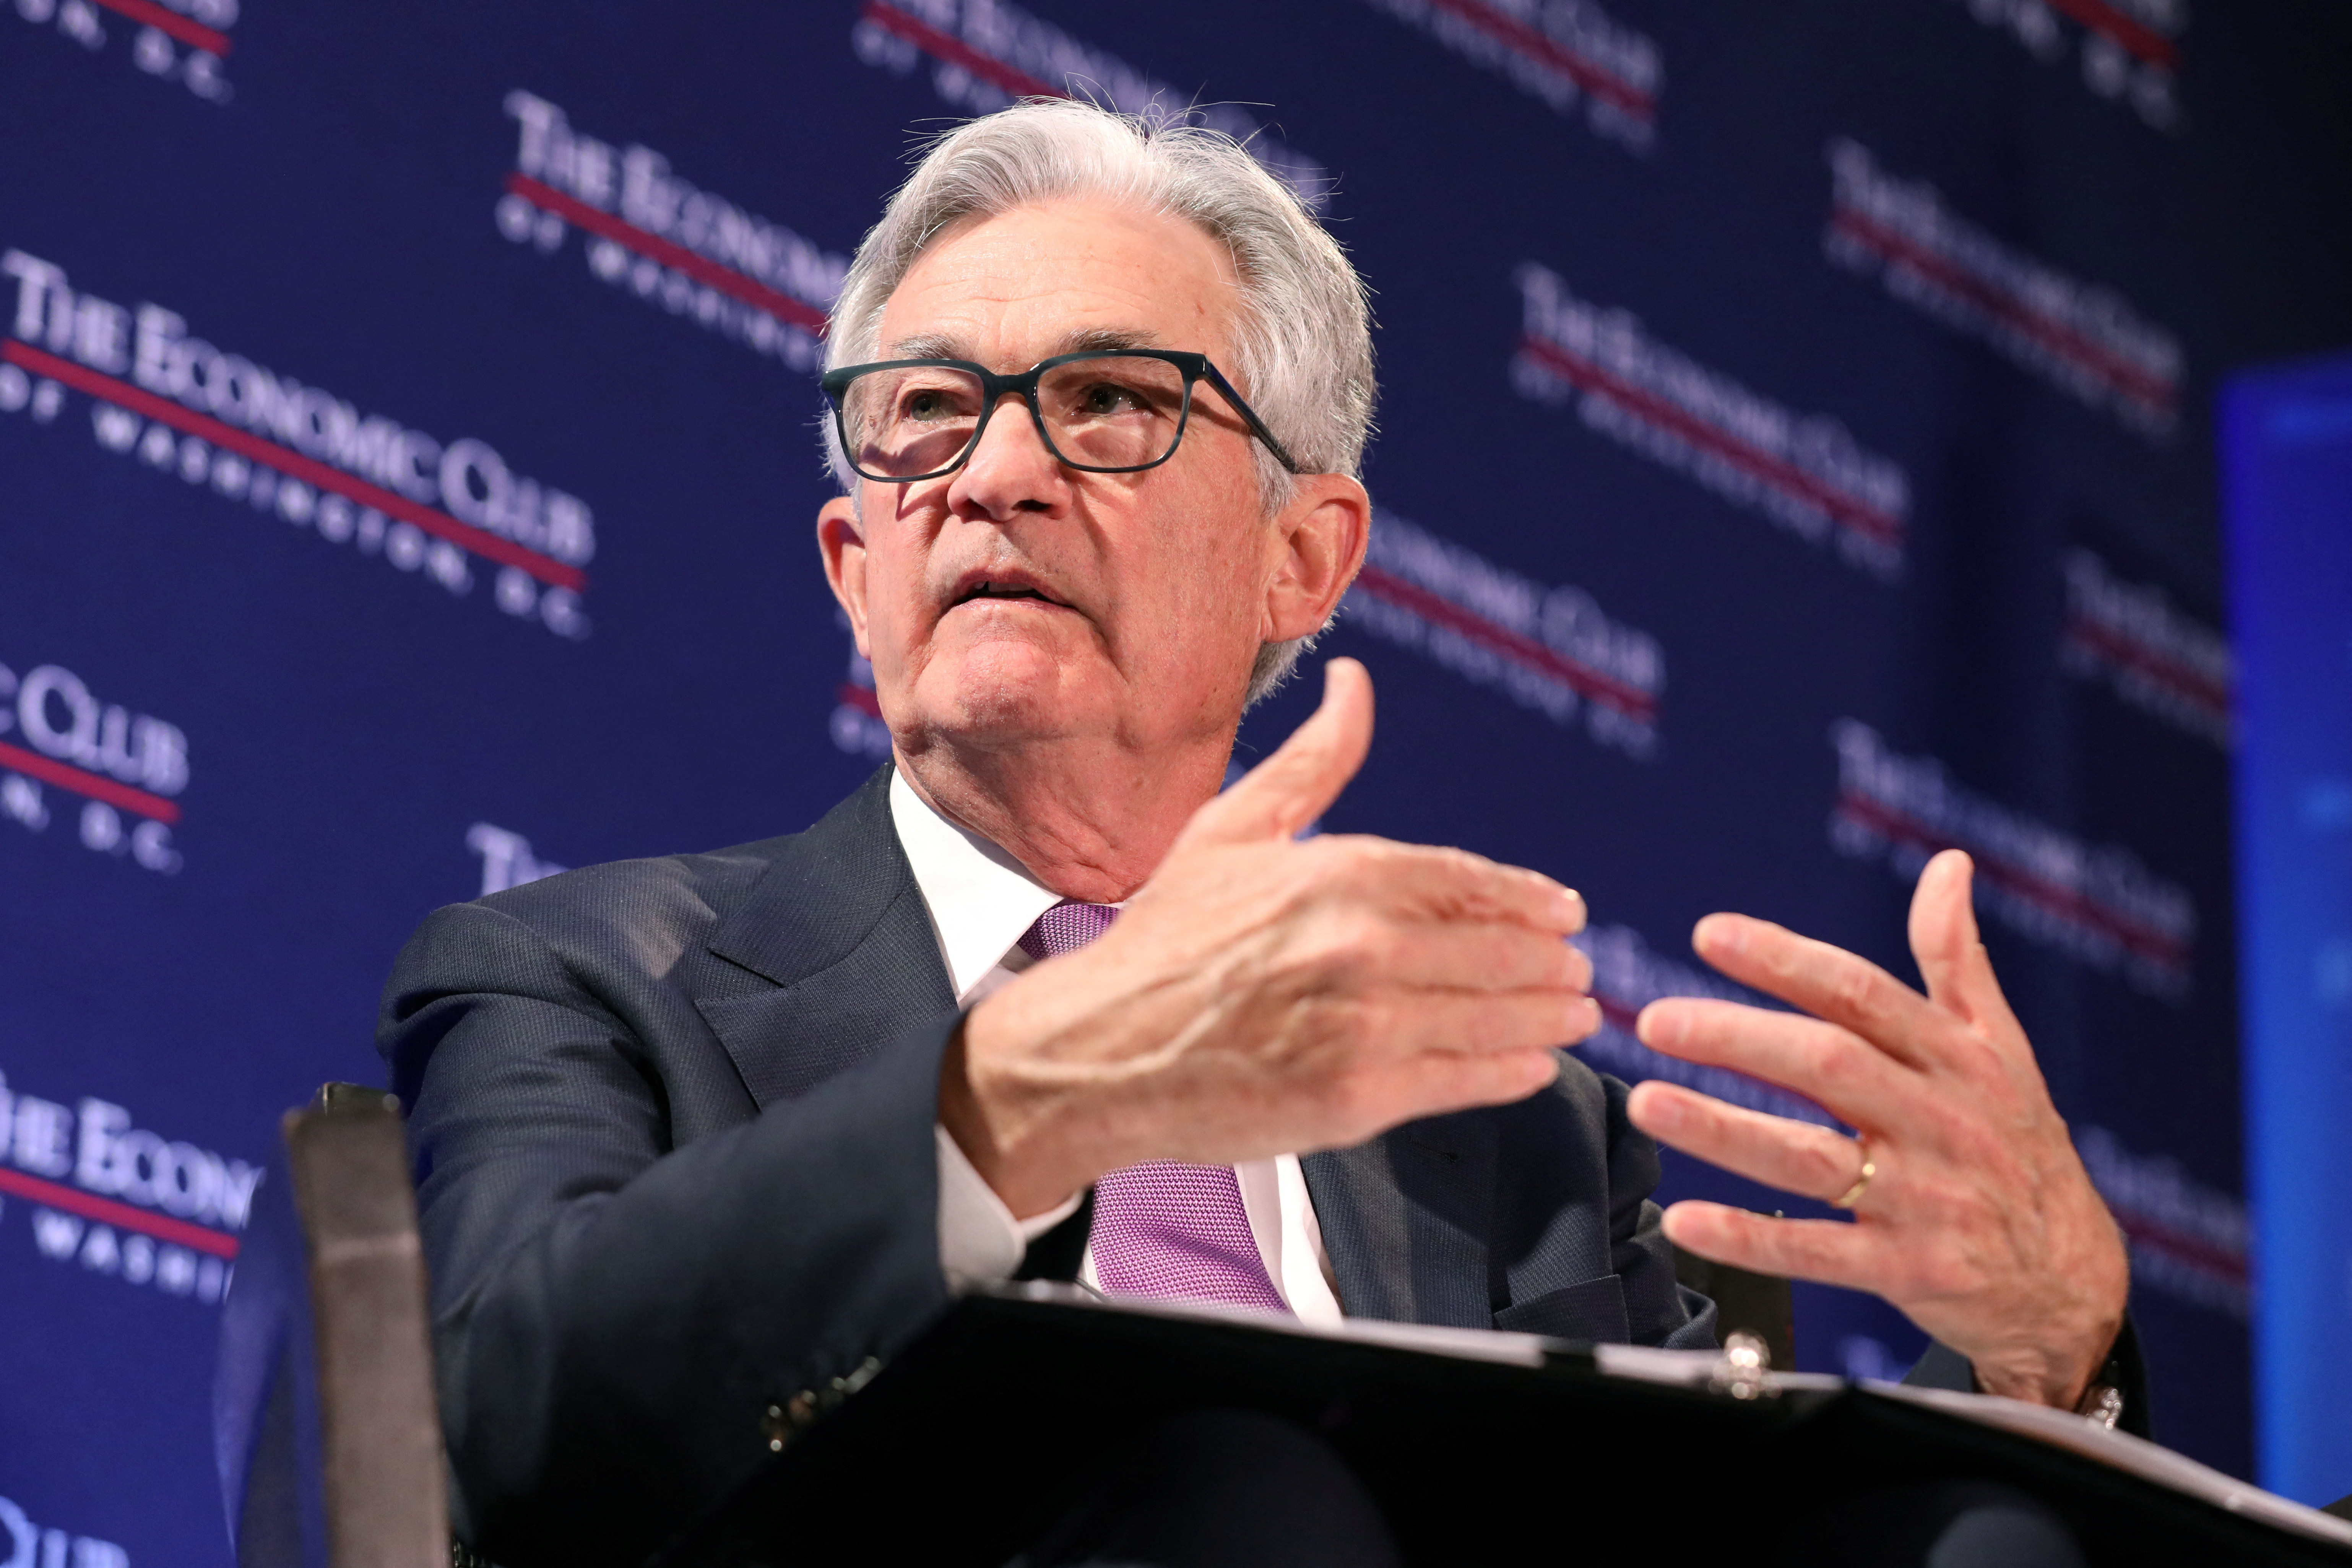 Fed Chair Jerome Powell speaks at The Economic Club of Washington